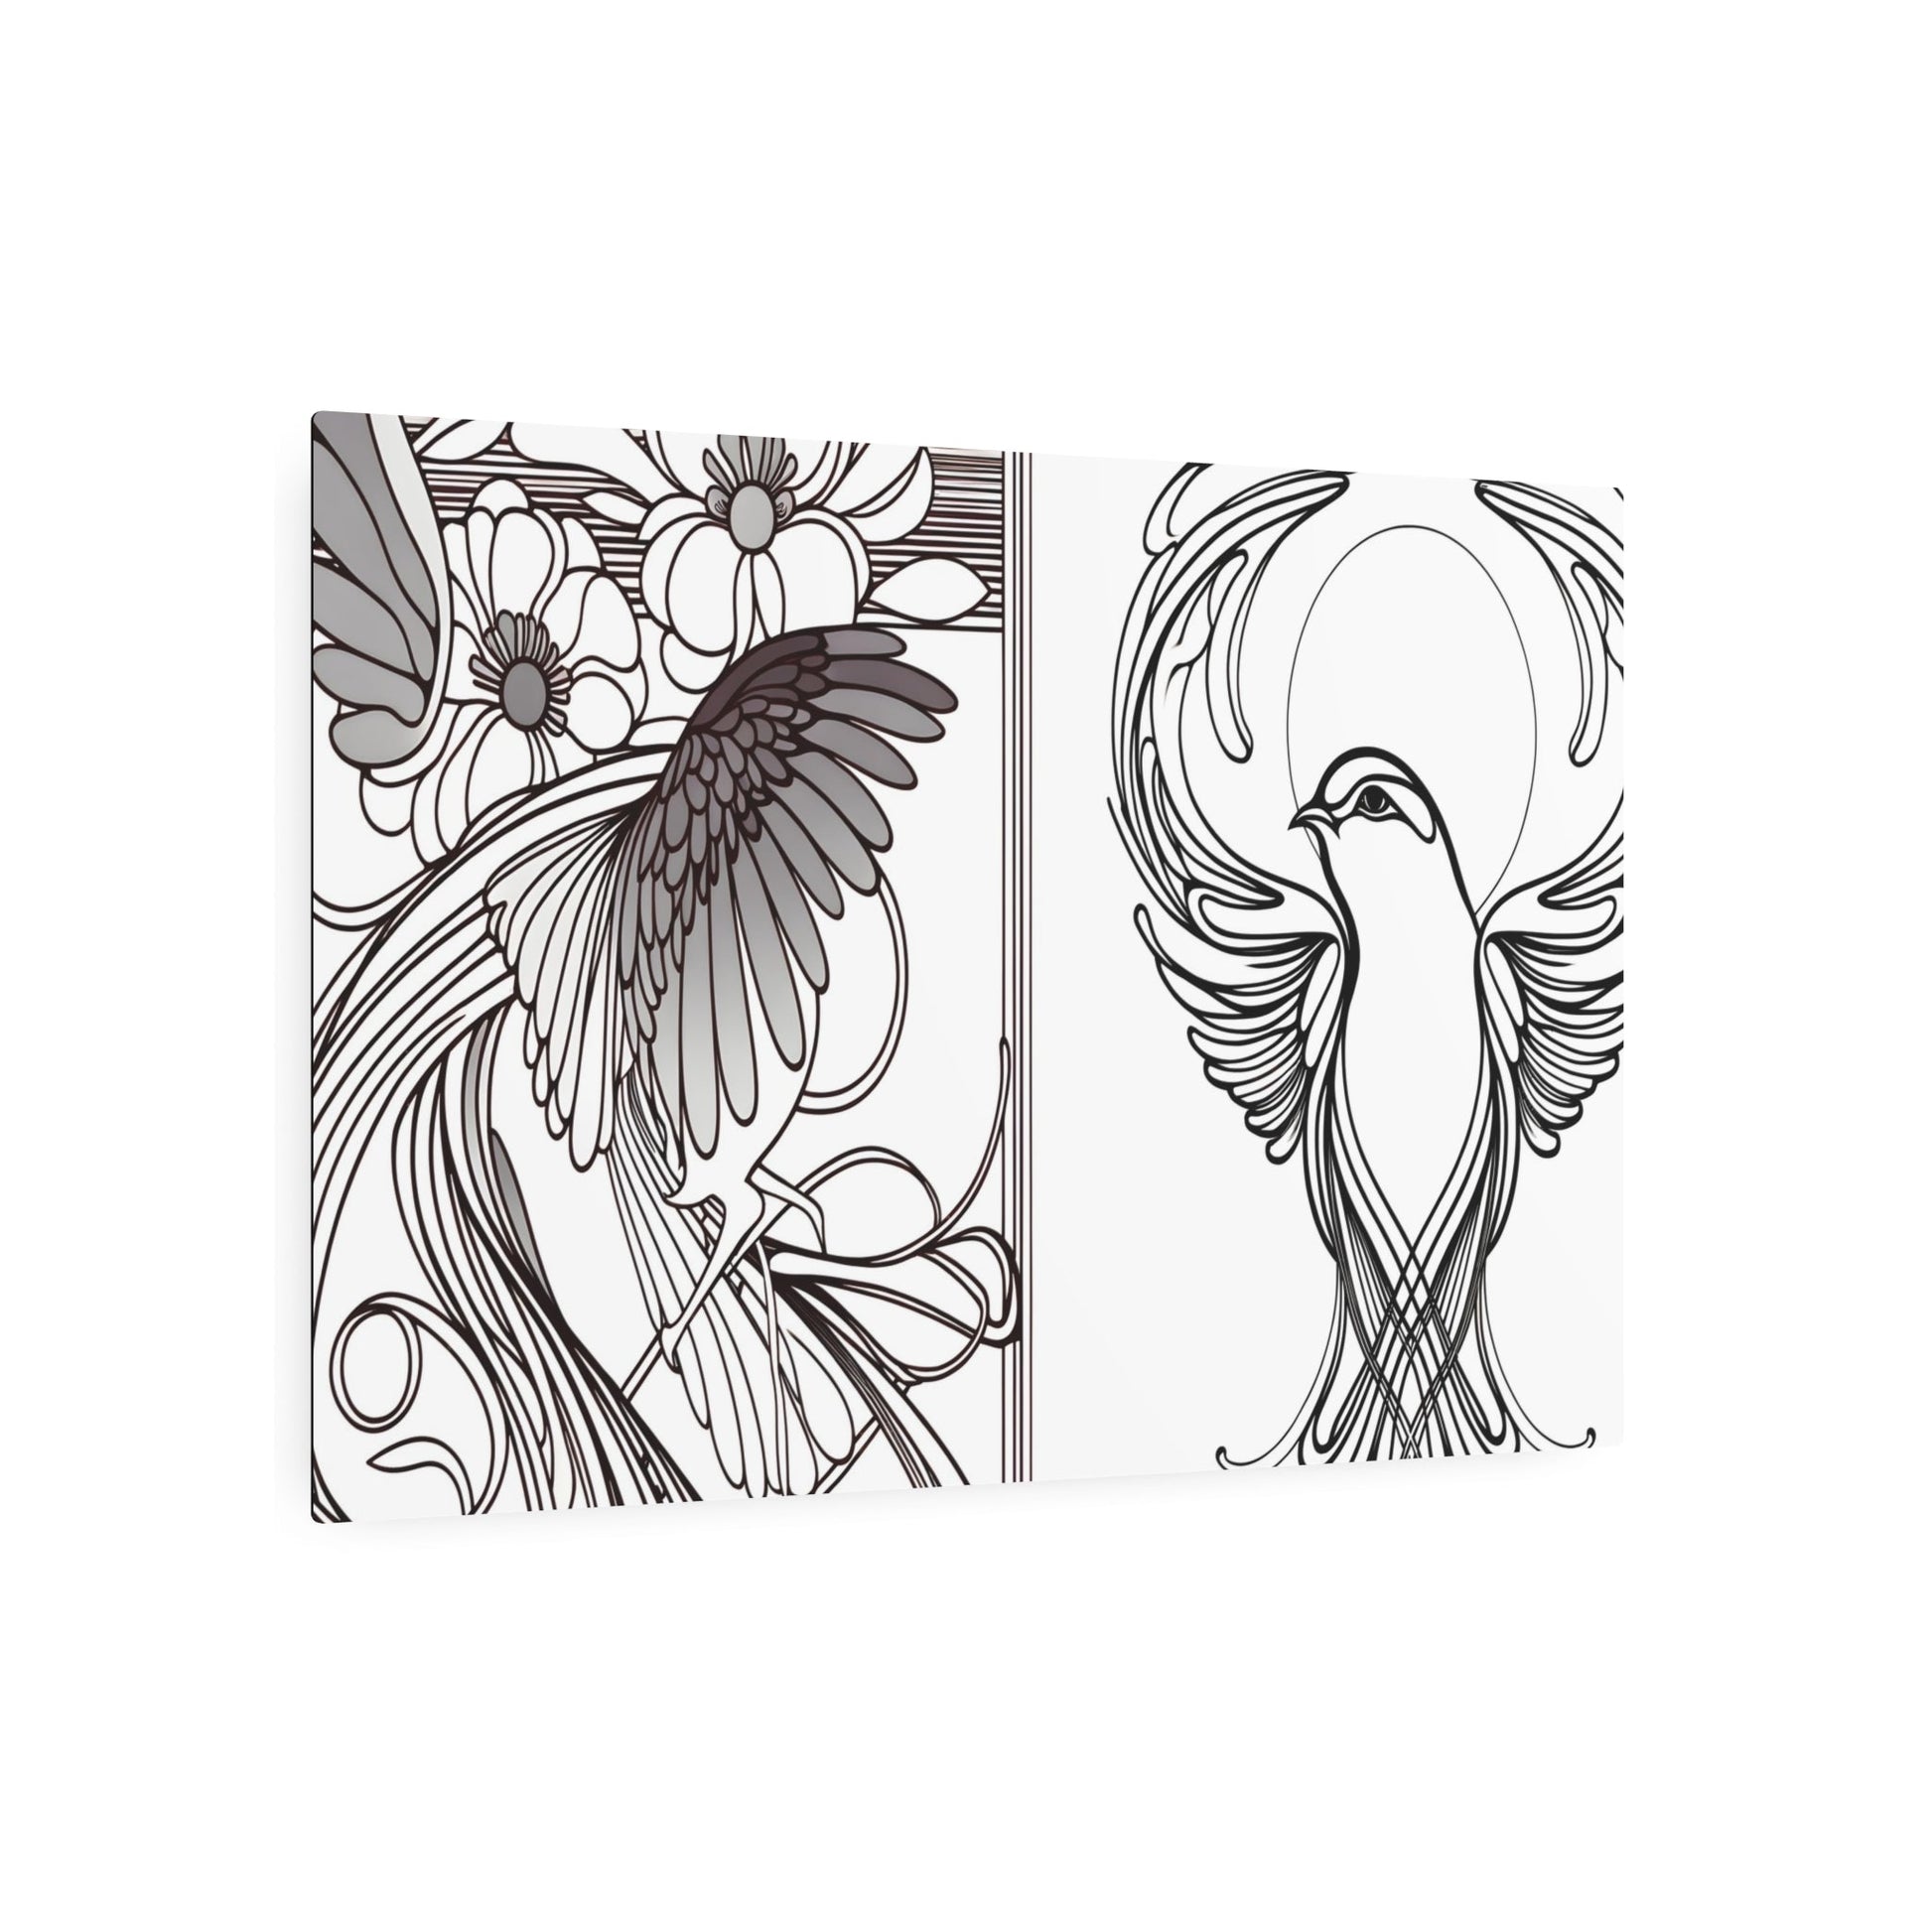 Metal Poster Art | "Art Nouveau Western Art Style - Intricate Bird and Floral Design with Organic Lines and Natural Patterns" - Metal Poster Art 36″ x 24″ (Horizontal) 0.12''